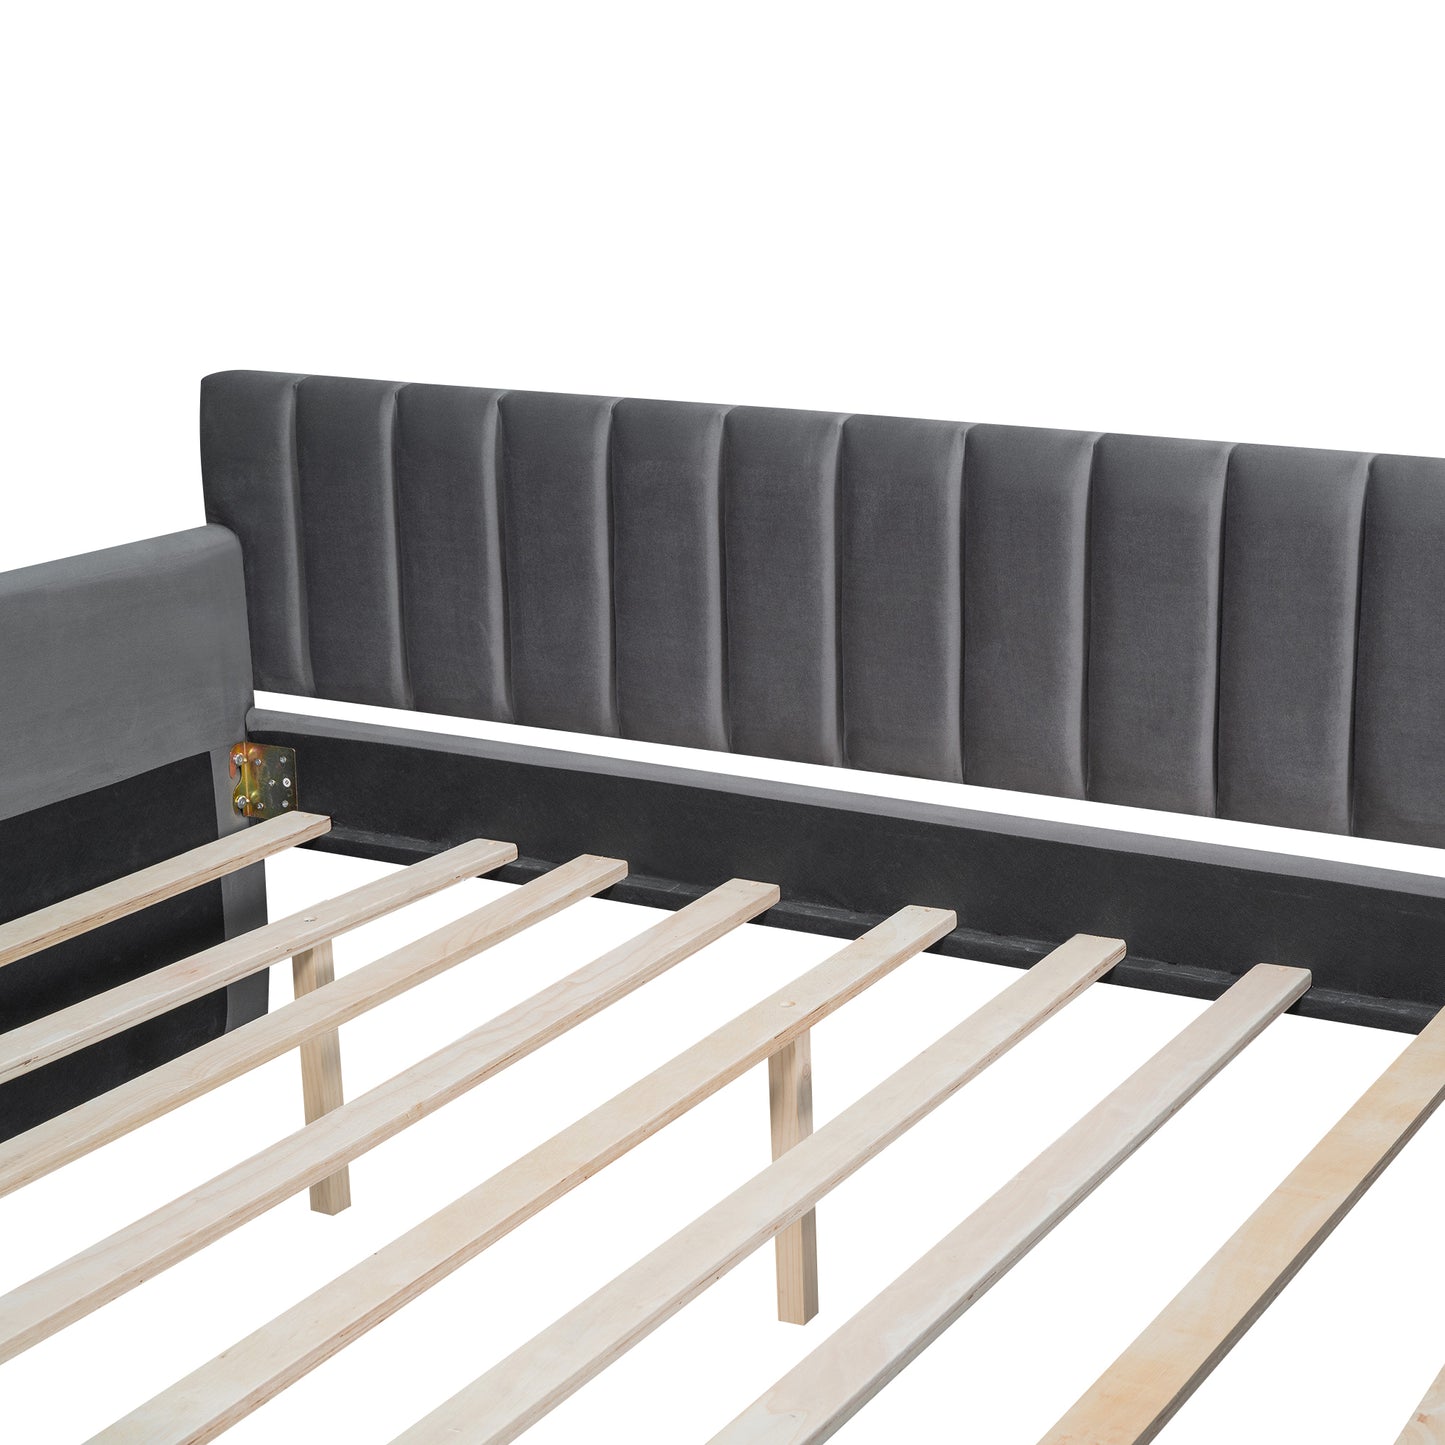 Vertical Lined Gray Daybed with Trundle (full)